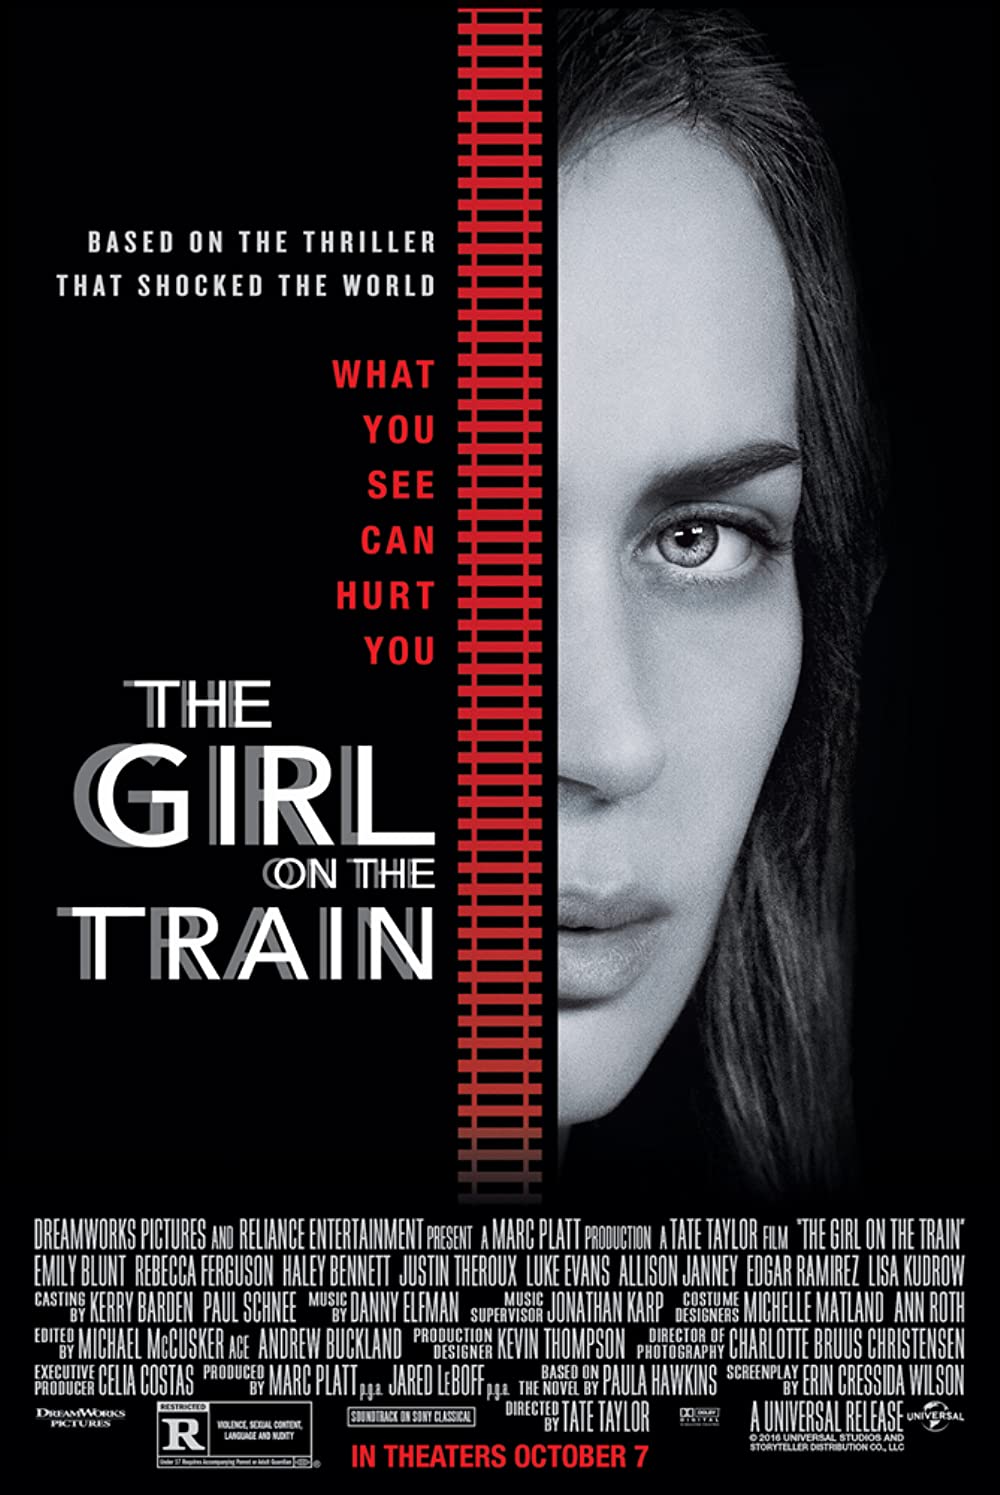 The Girl on the Train (2016) Best Train Movies You Can't Miss